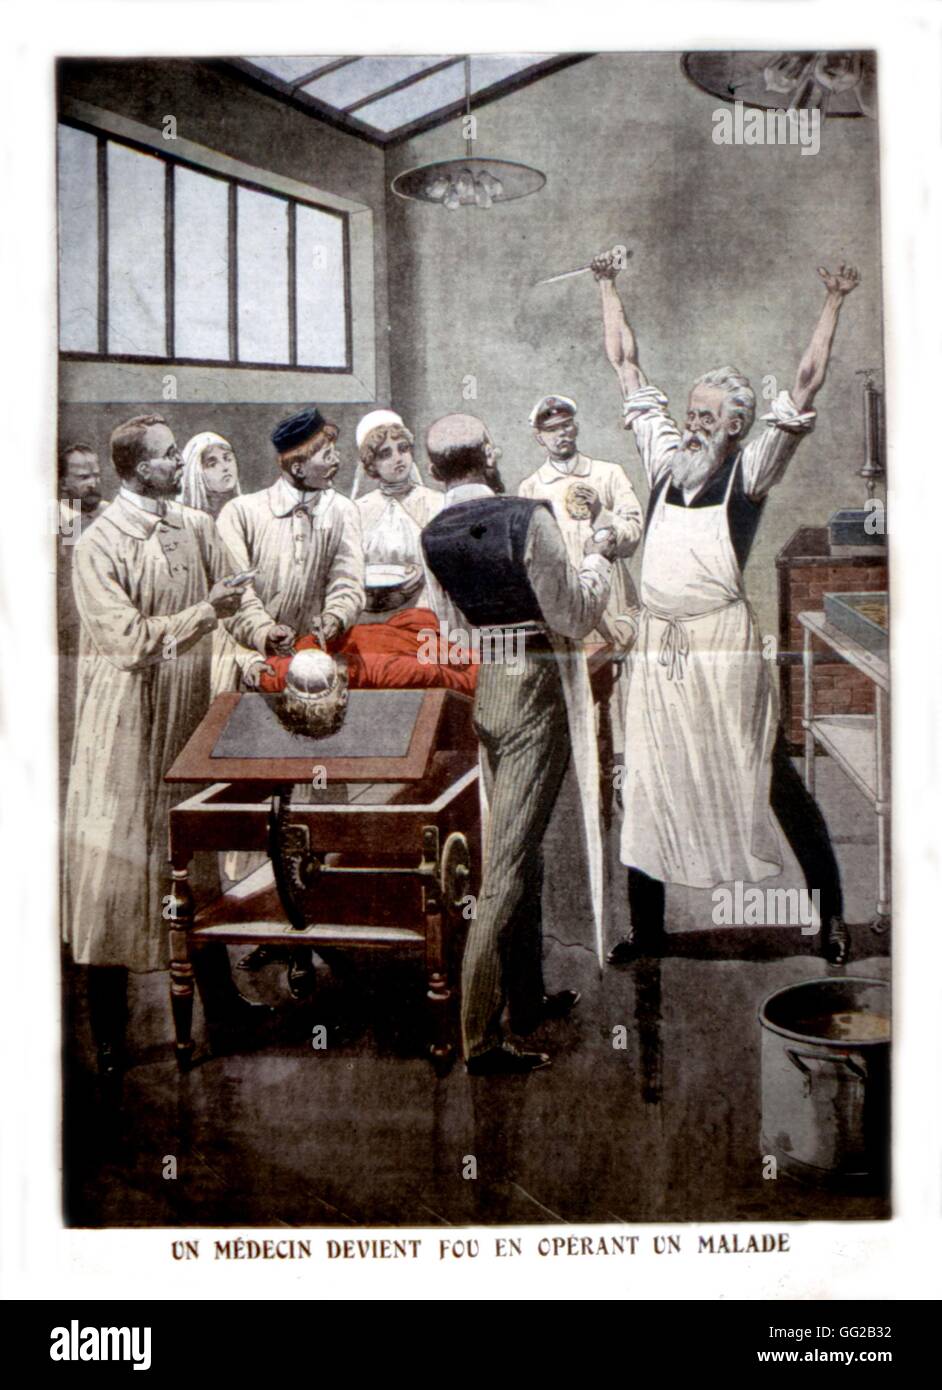 A surgeon getting mad while operating on a patient, in 'Le Petit journal' c.1900 France Stock Photo